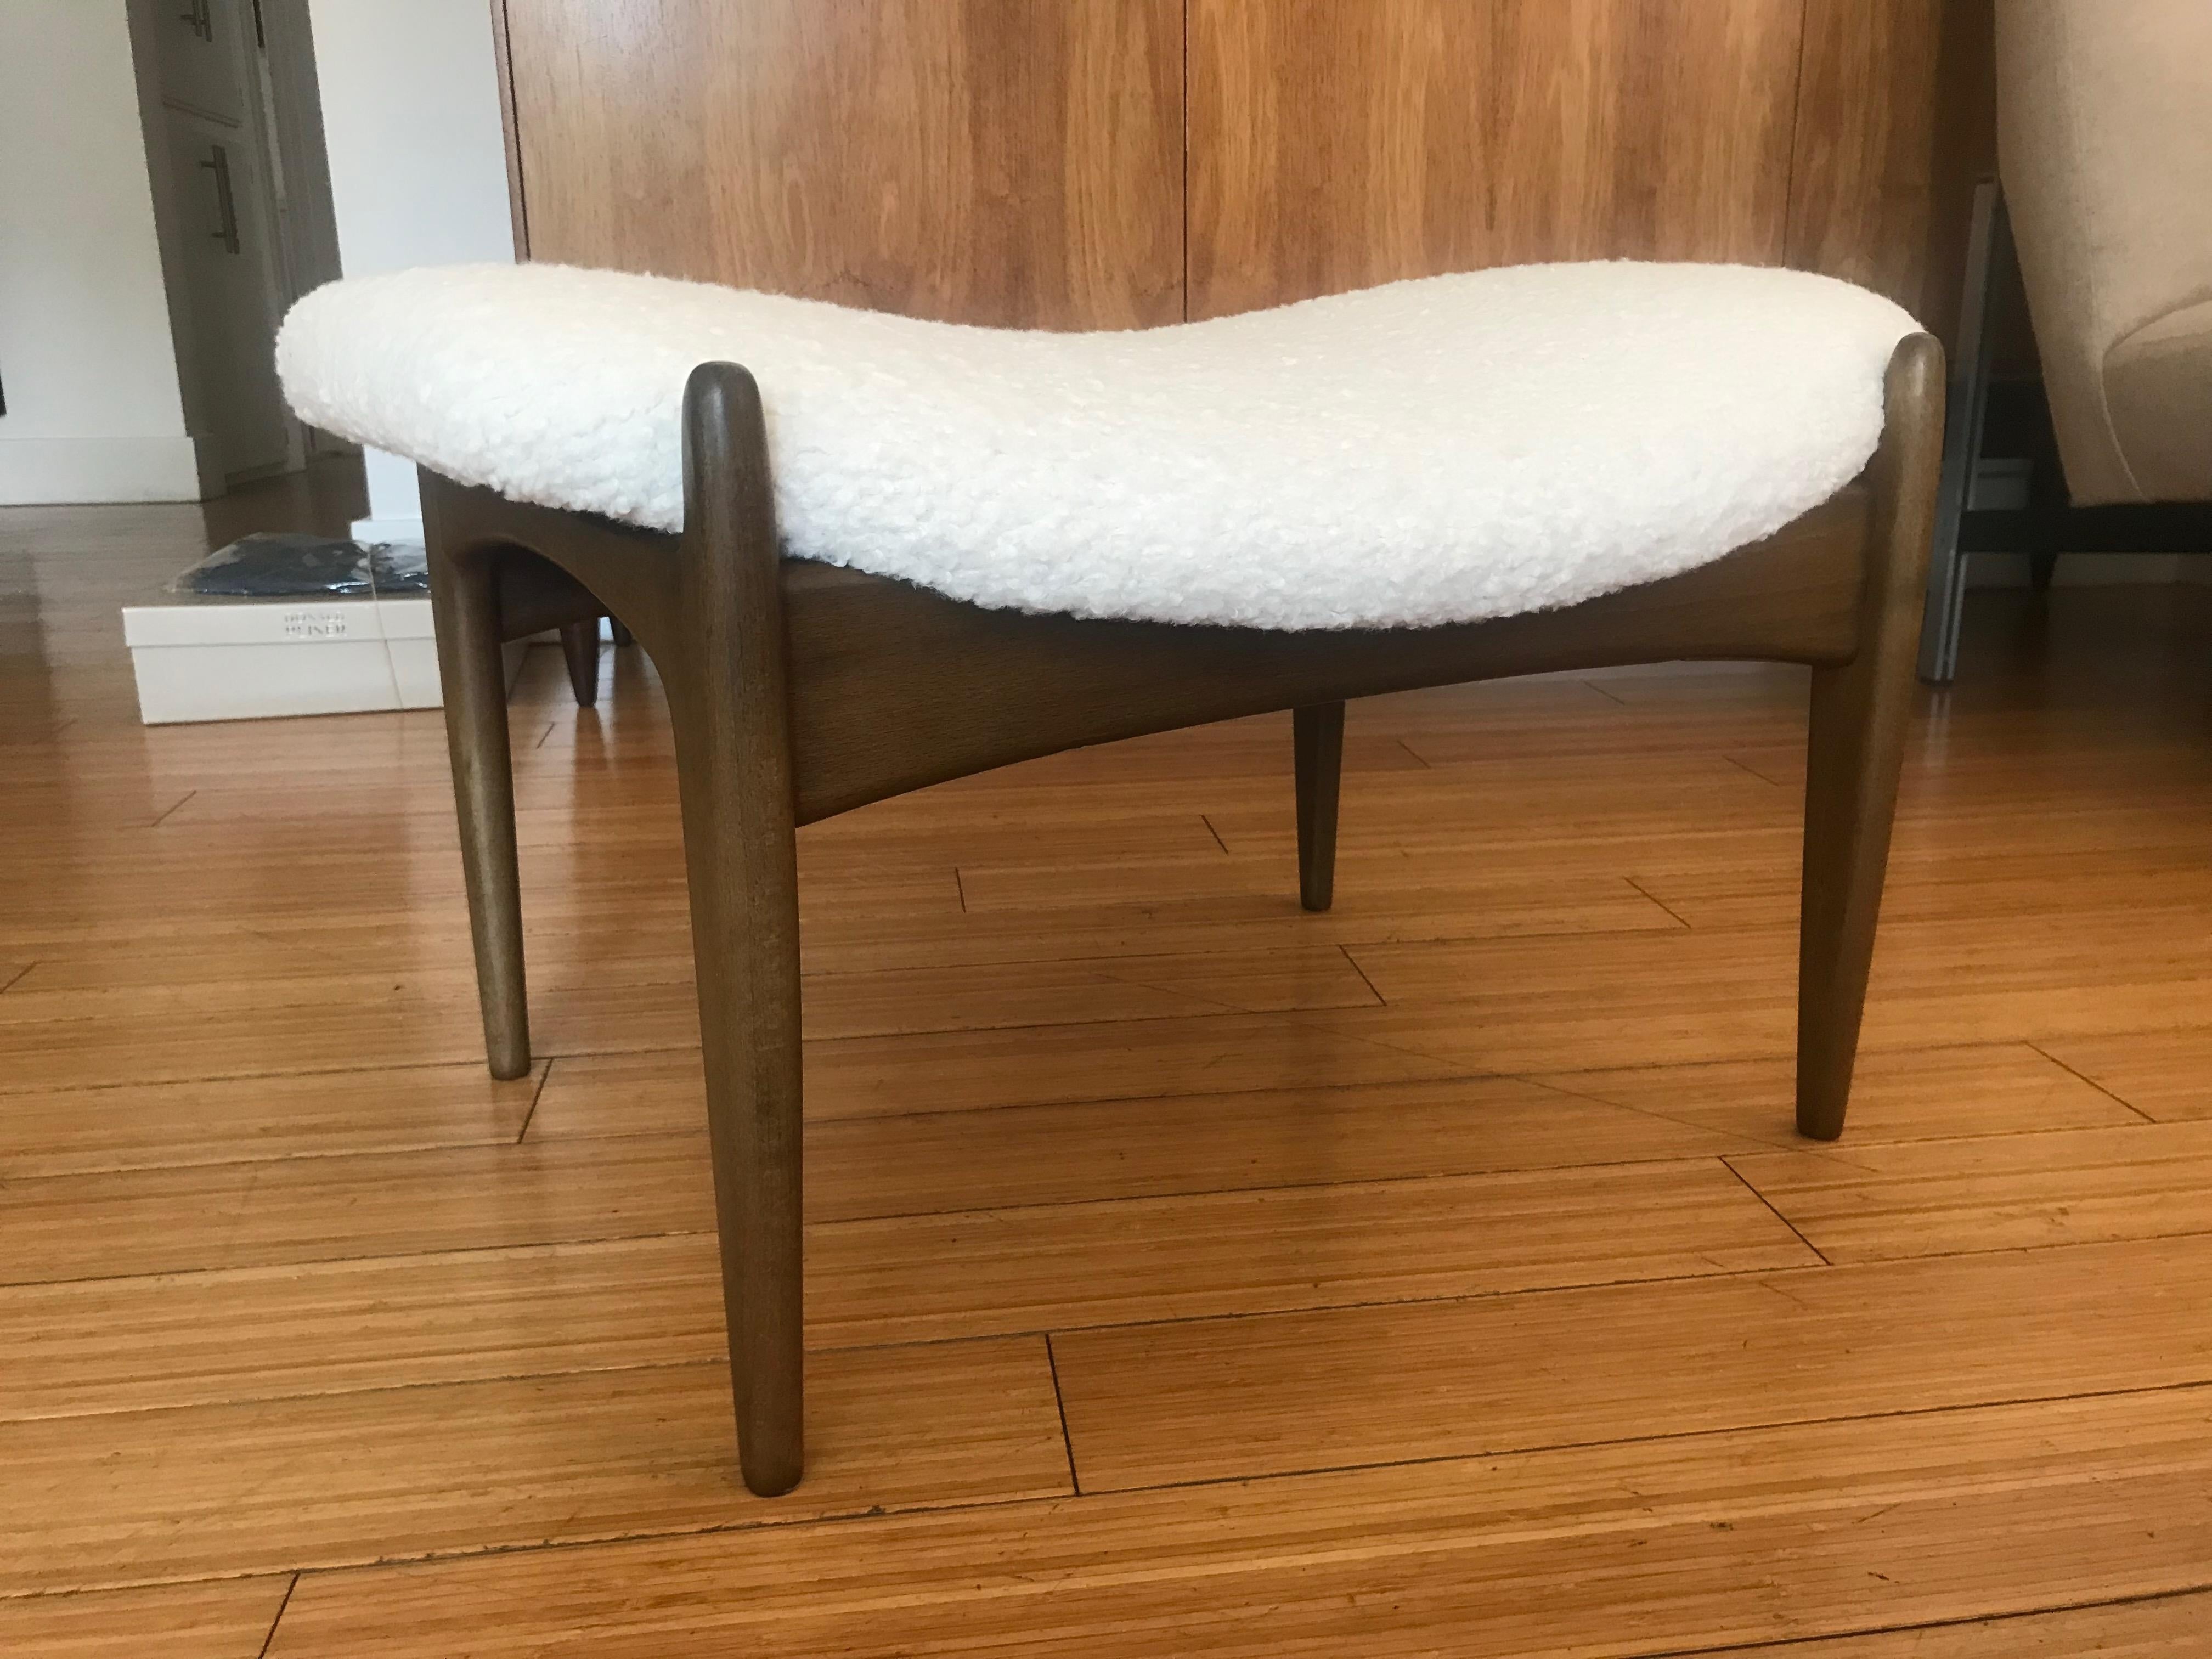 Classic Danish modern design
Curved wood seat with new boucle upholstery on mahogany wood base
Great for random seating or pair with 'Elizabeth' lounge chair.
 